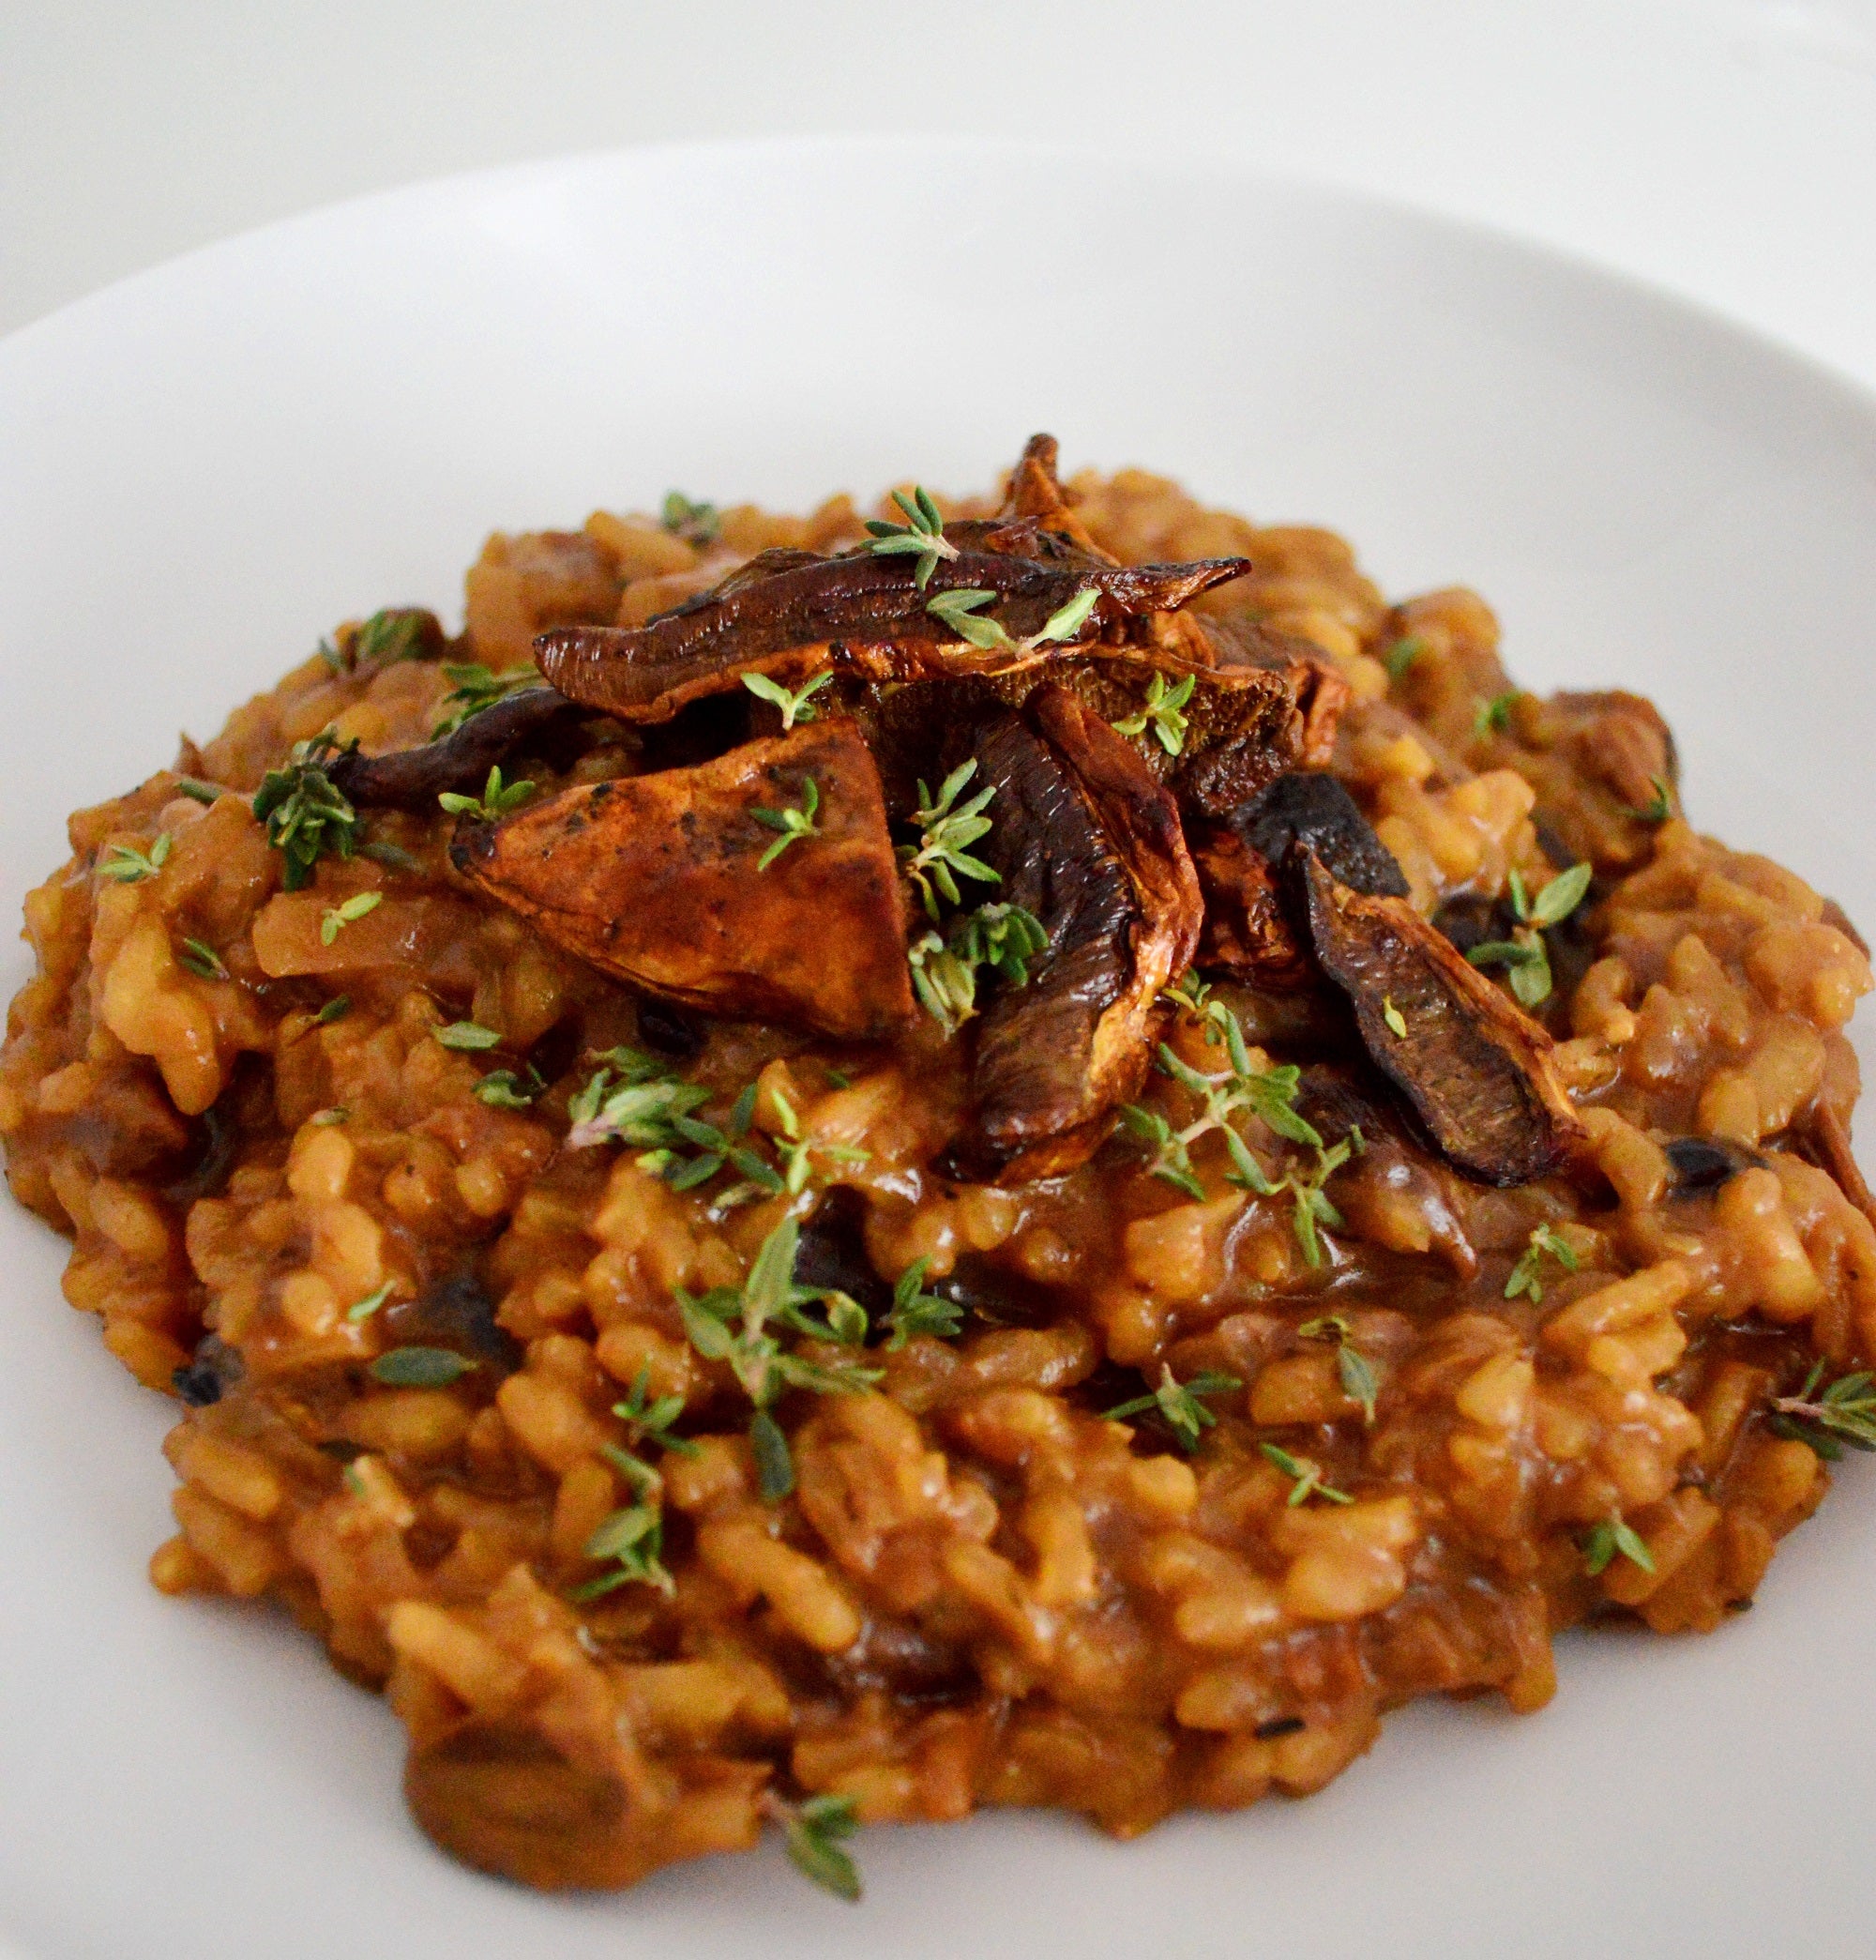 Woodland risotto by Novel Wines